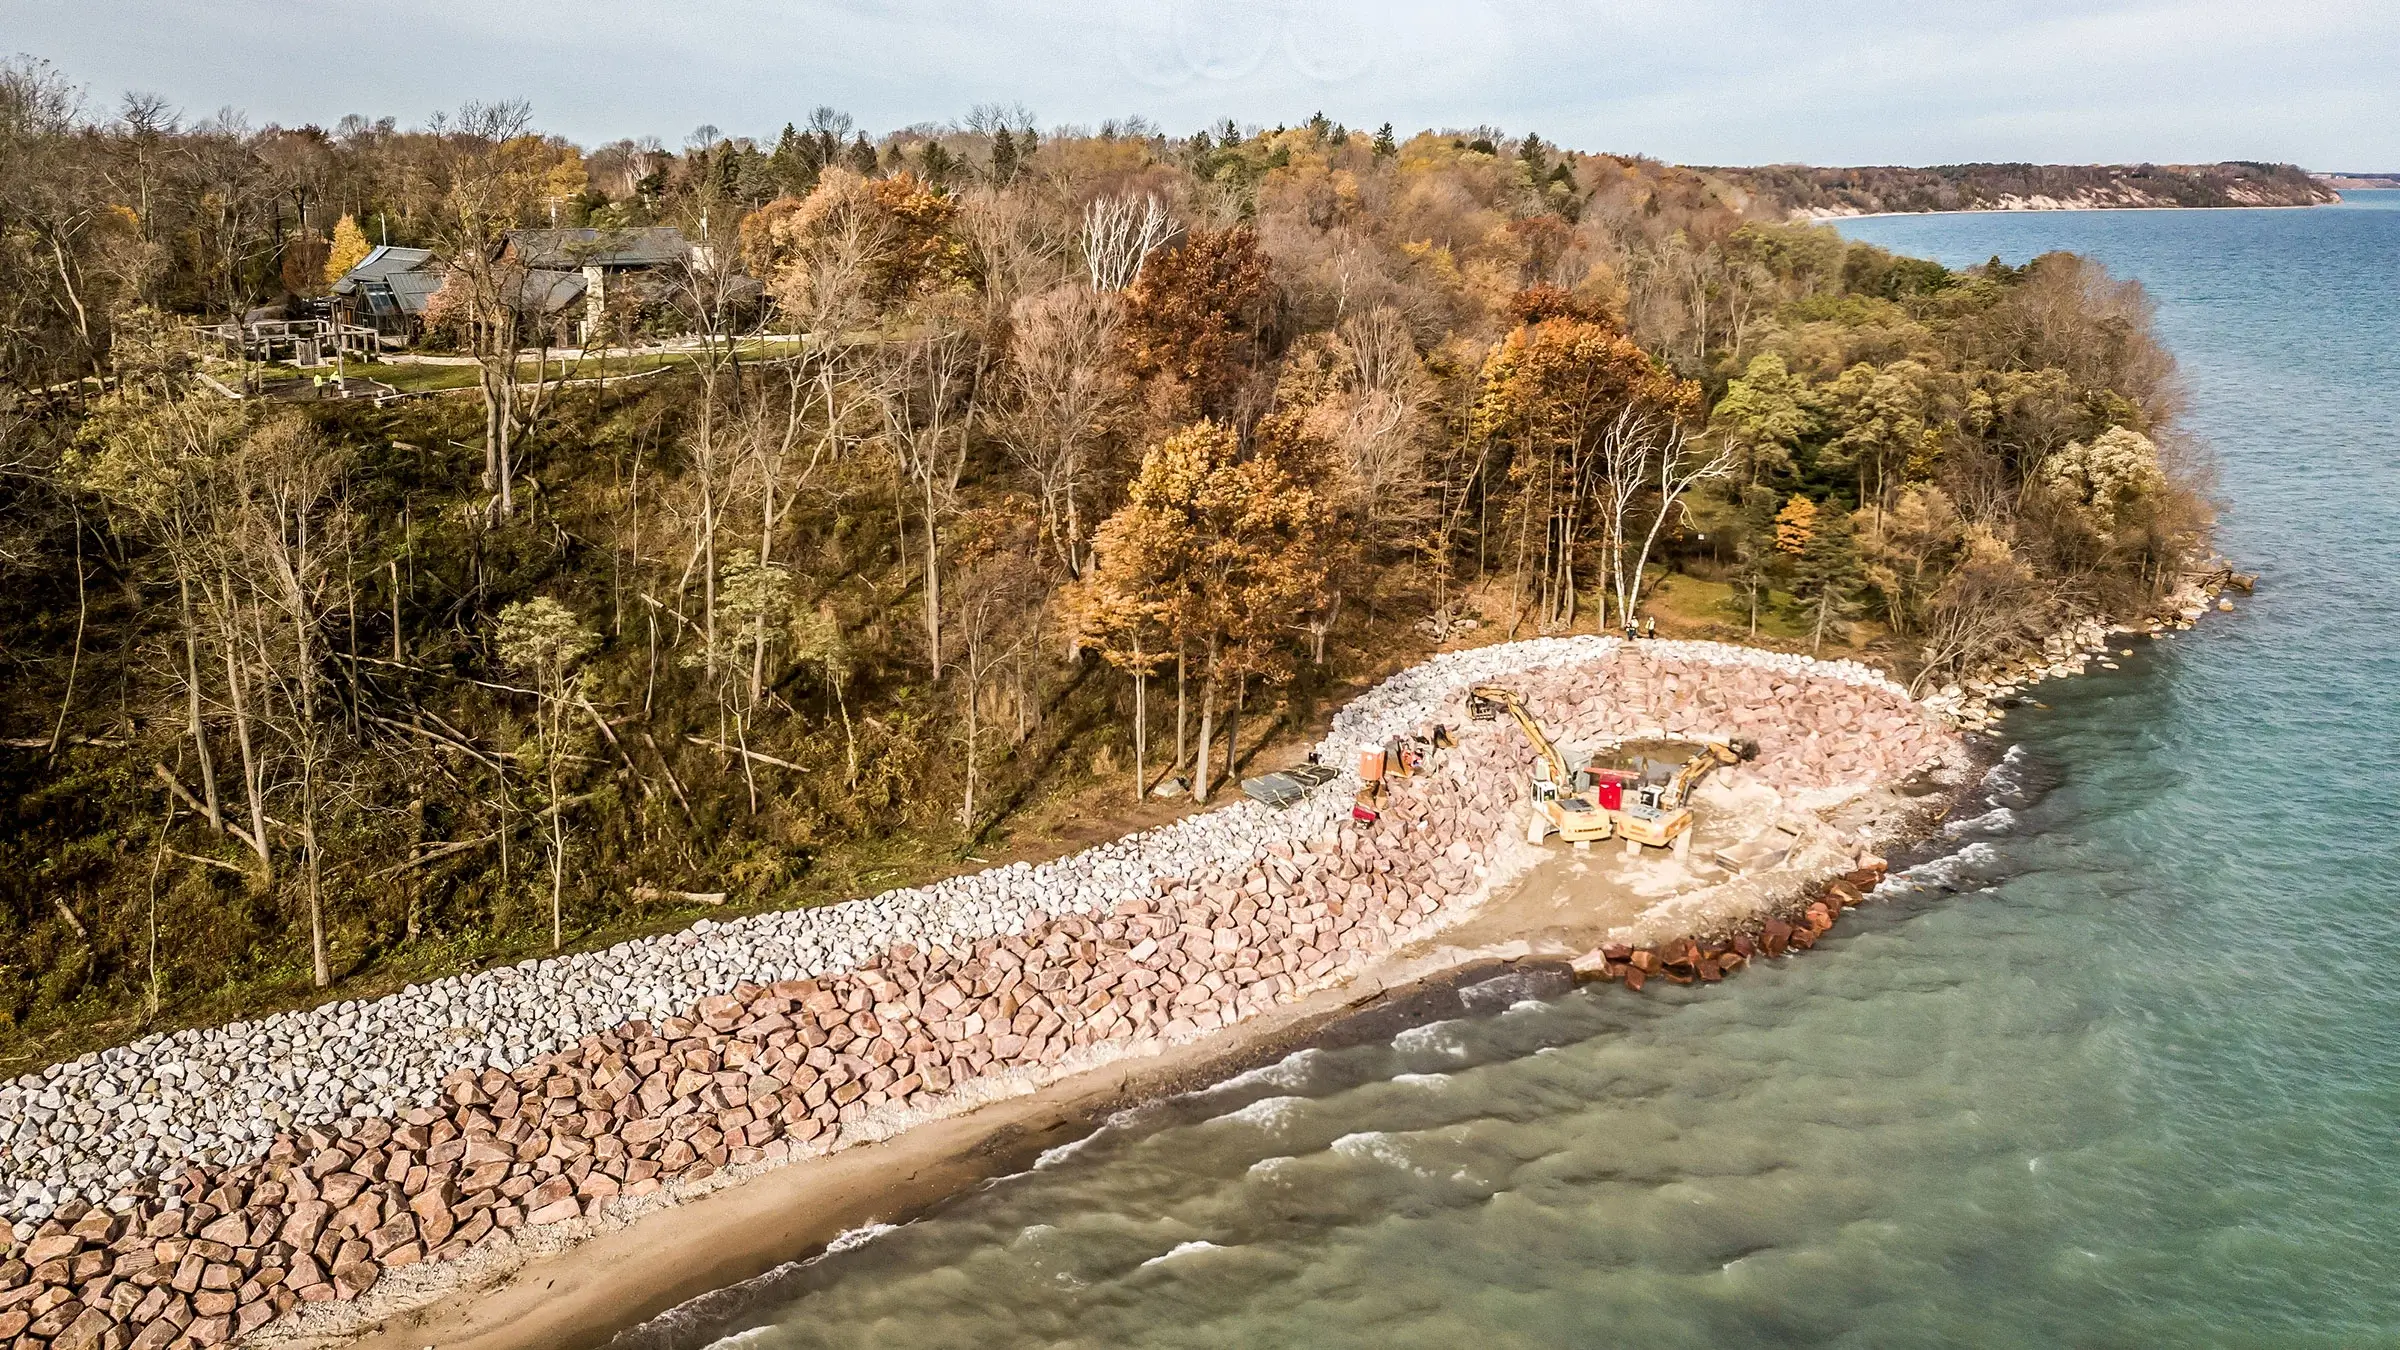 Riprap and armor stone are used to reinforce an eroding lakeshore